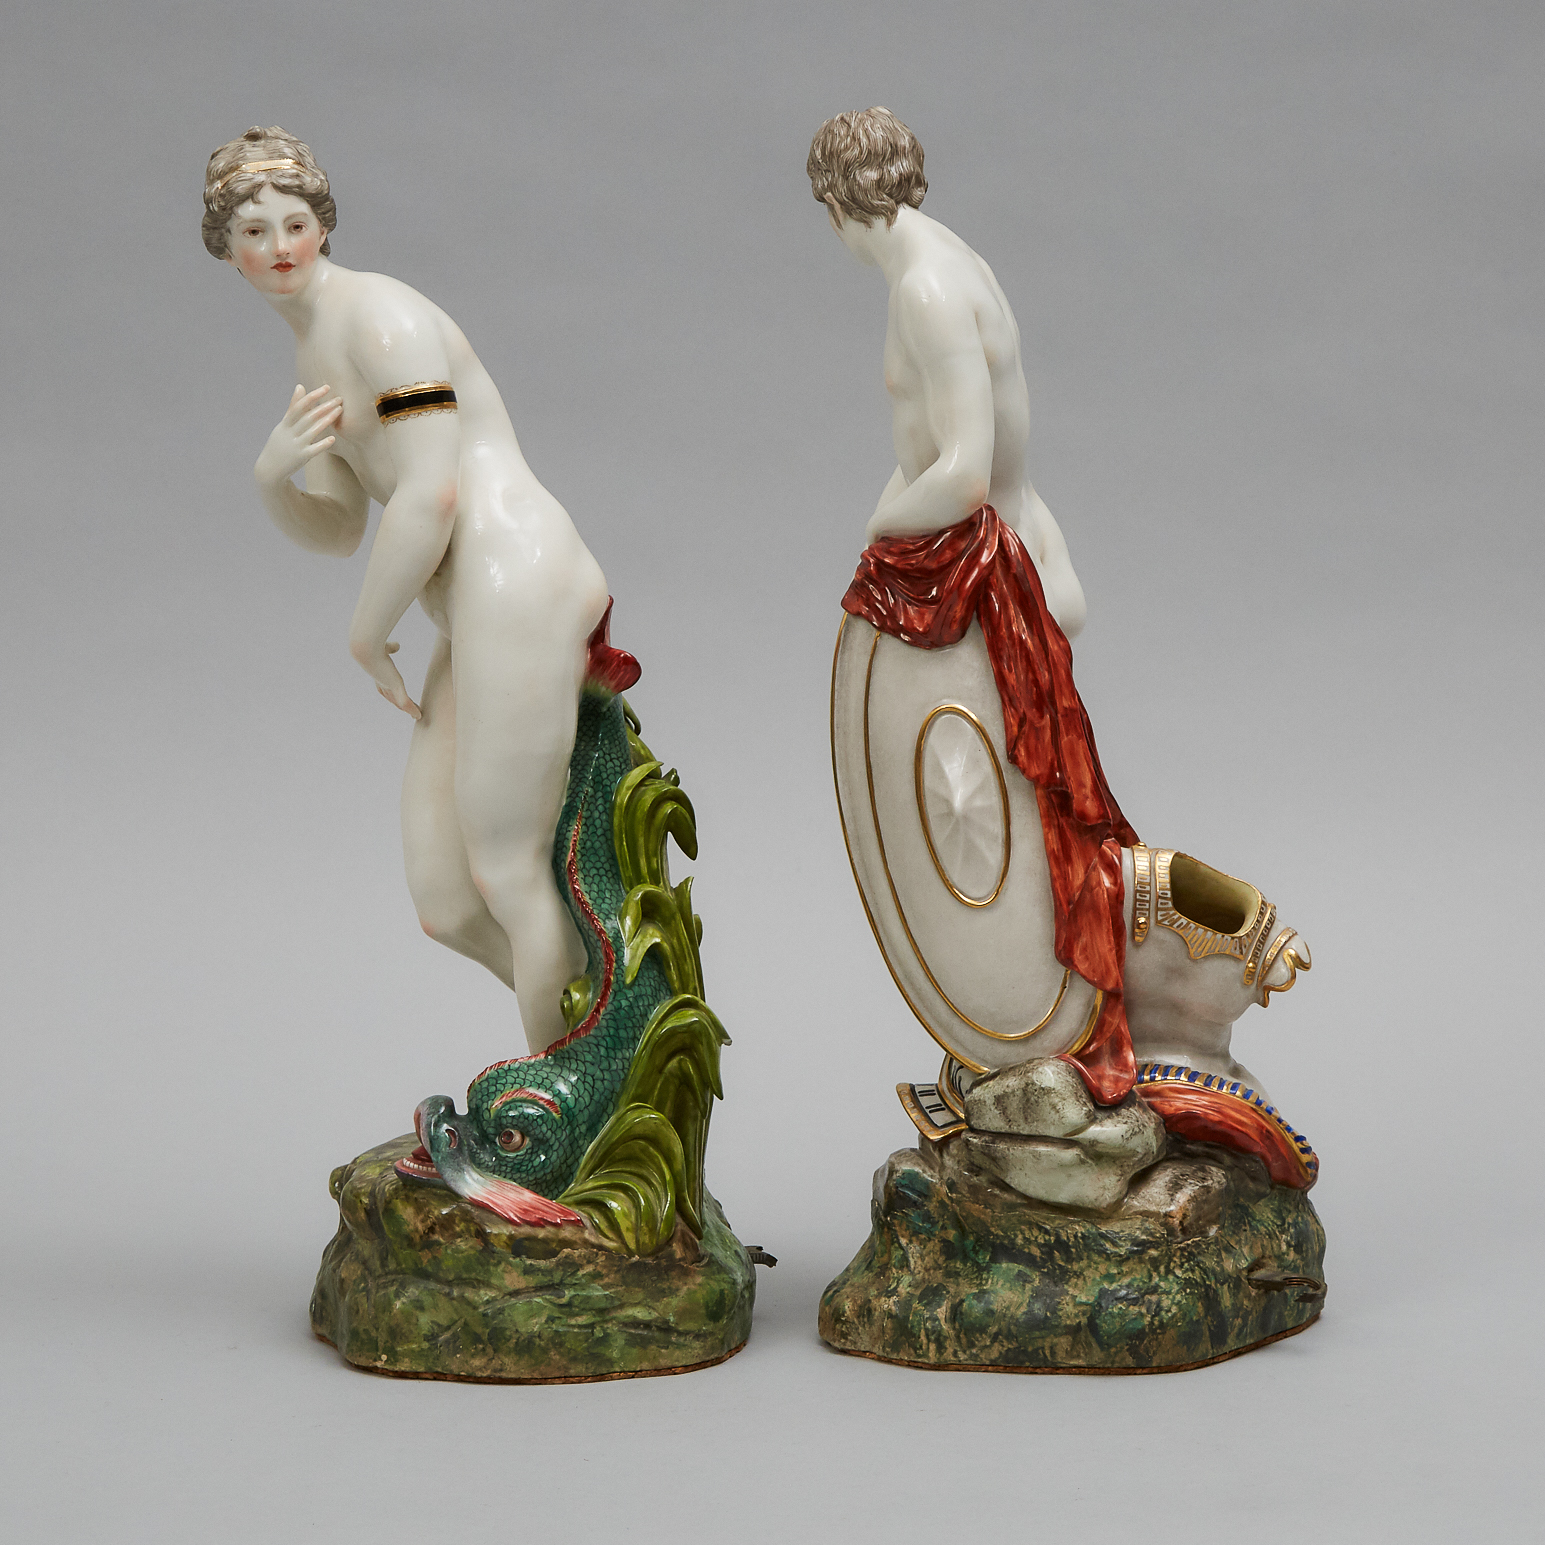 Pair of Continental Porcelain Figures of Venus and Apollo, late 19th/early 20th century